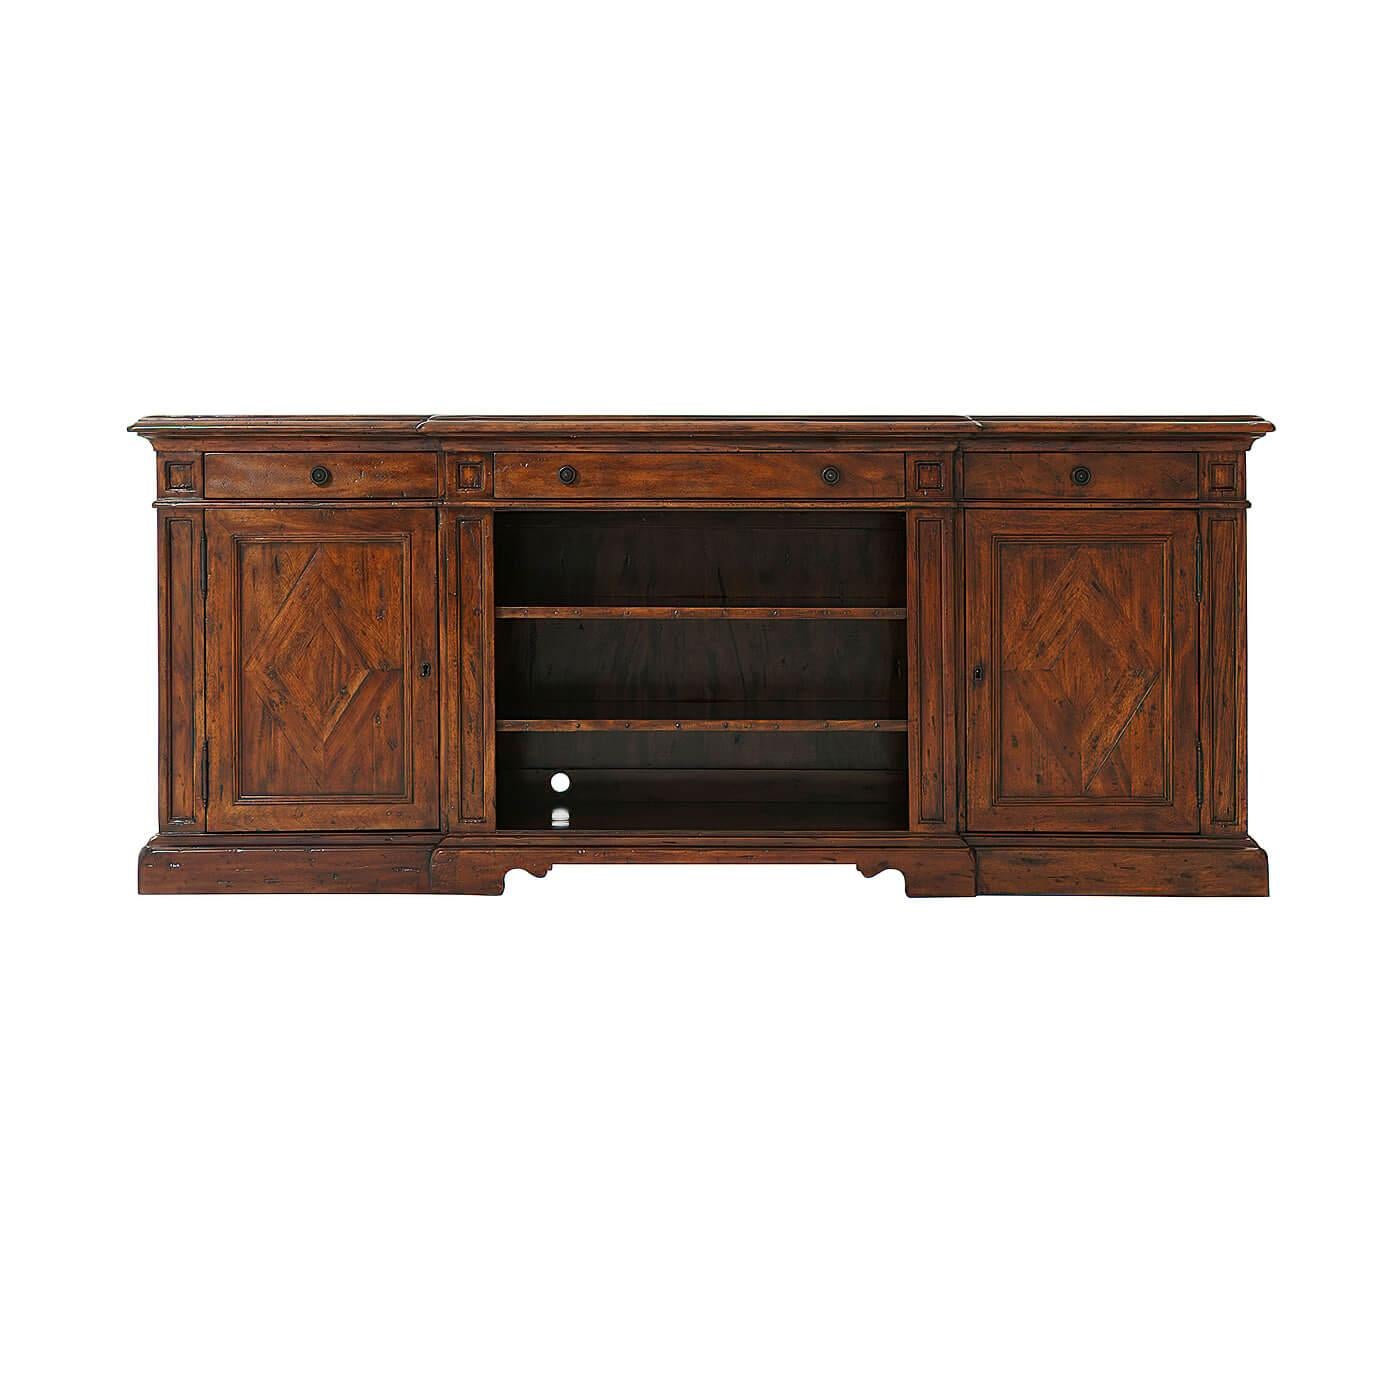 A European antiqued wood breakfront low media console, with three frieze drawers with verdigris brass handles open central section, on bracket feet. The side cabinets each enclosing an adjustable shelf.

Dimensions: 73.25